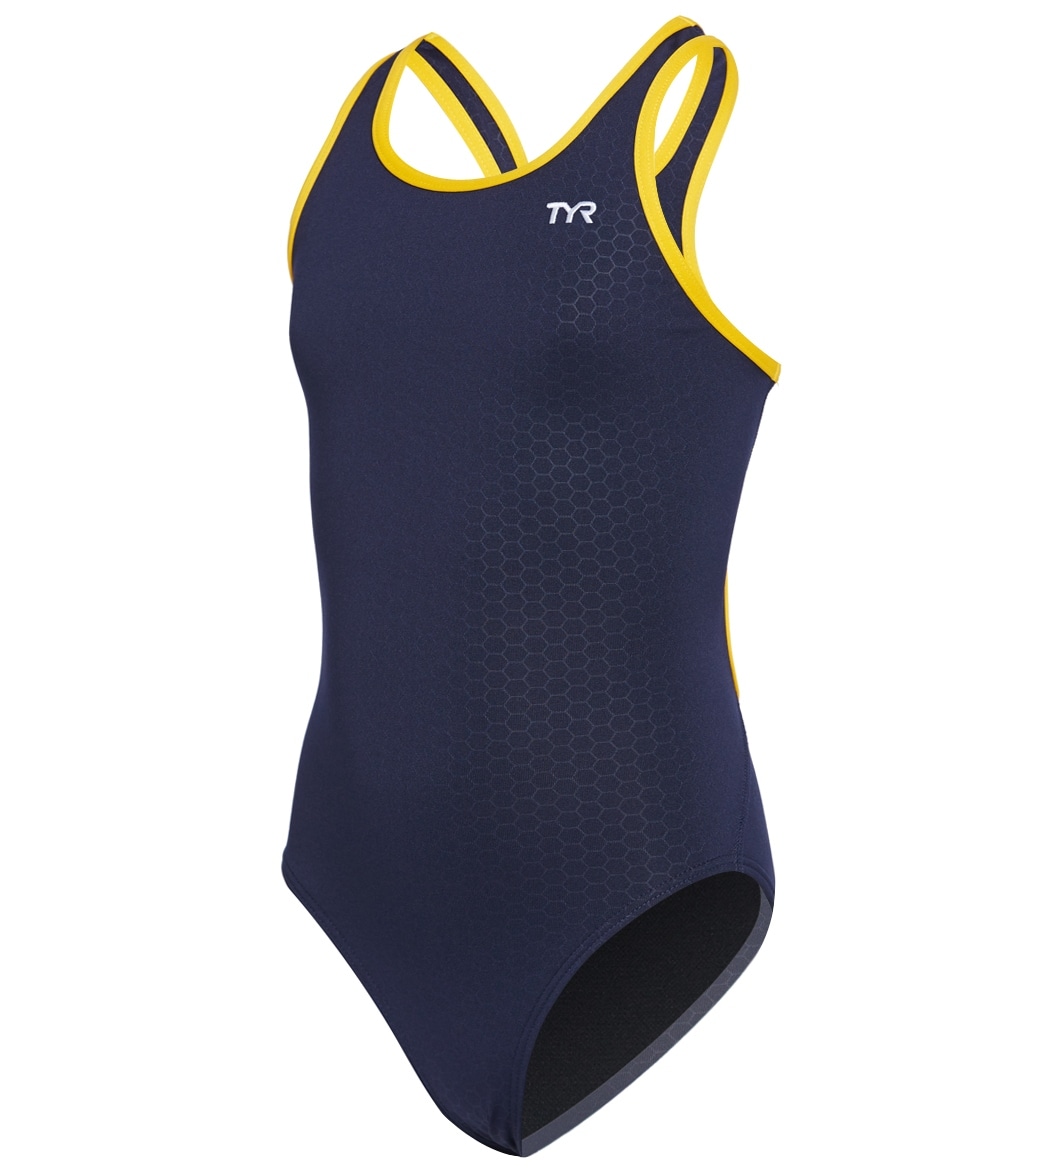 TYR Girls' Hexa Maxfit One Piece Swimsuit - Navy/Gold 22 Polyester/Spandex - Swimoutlet.com